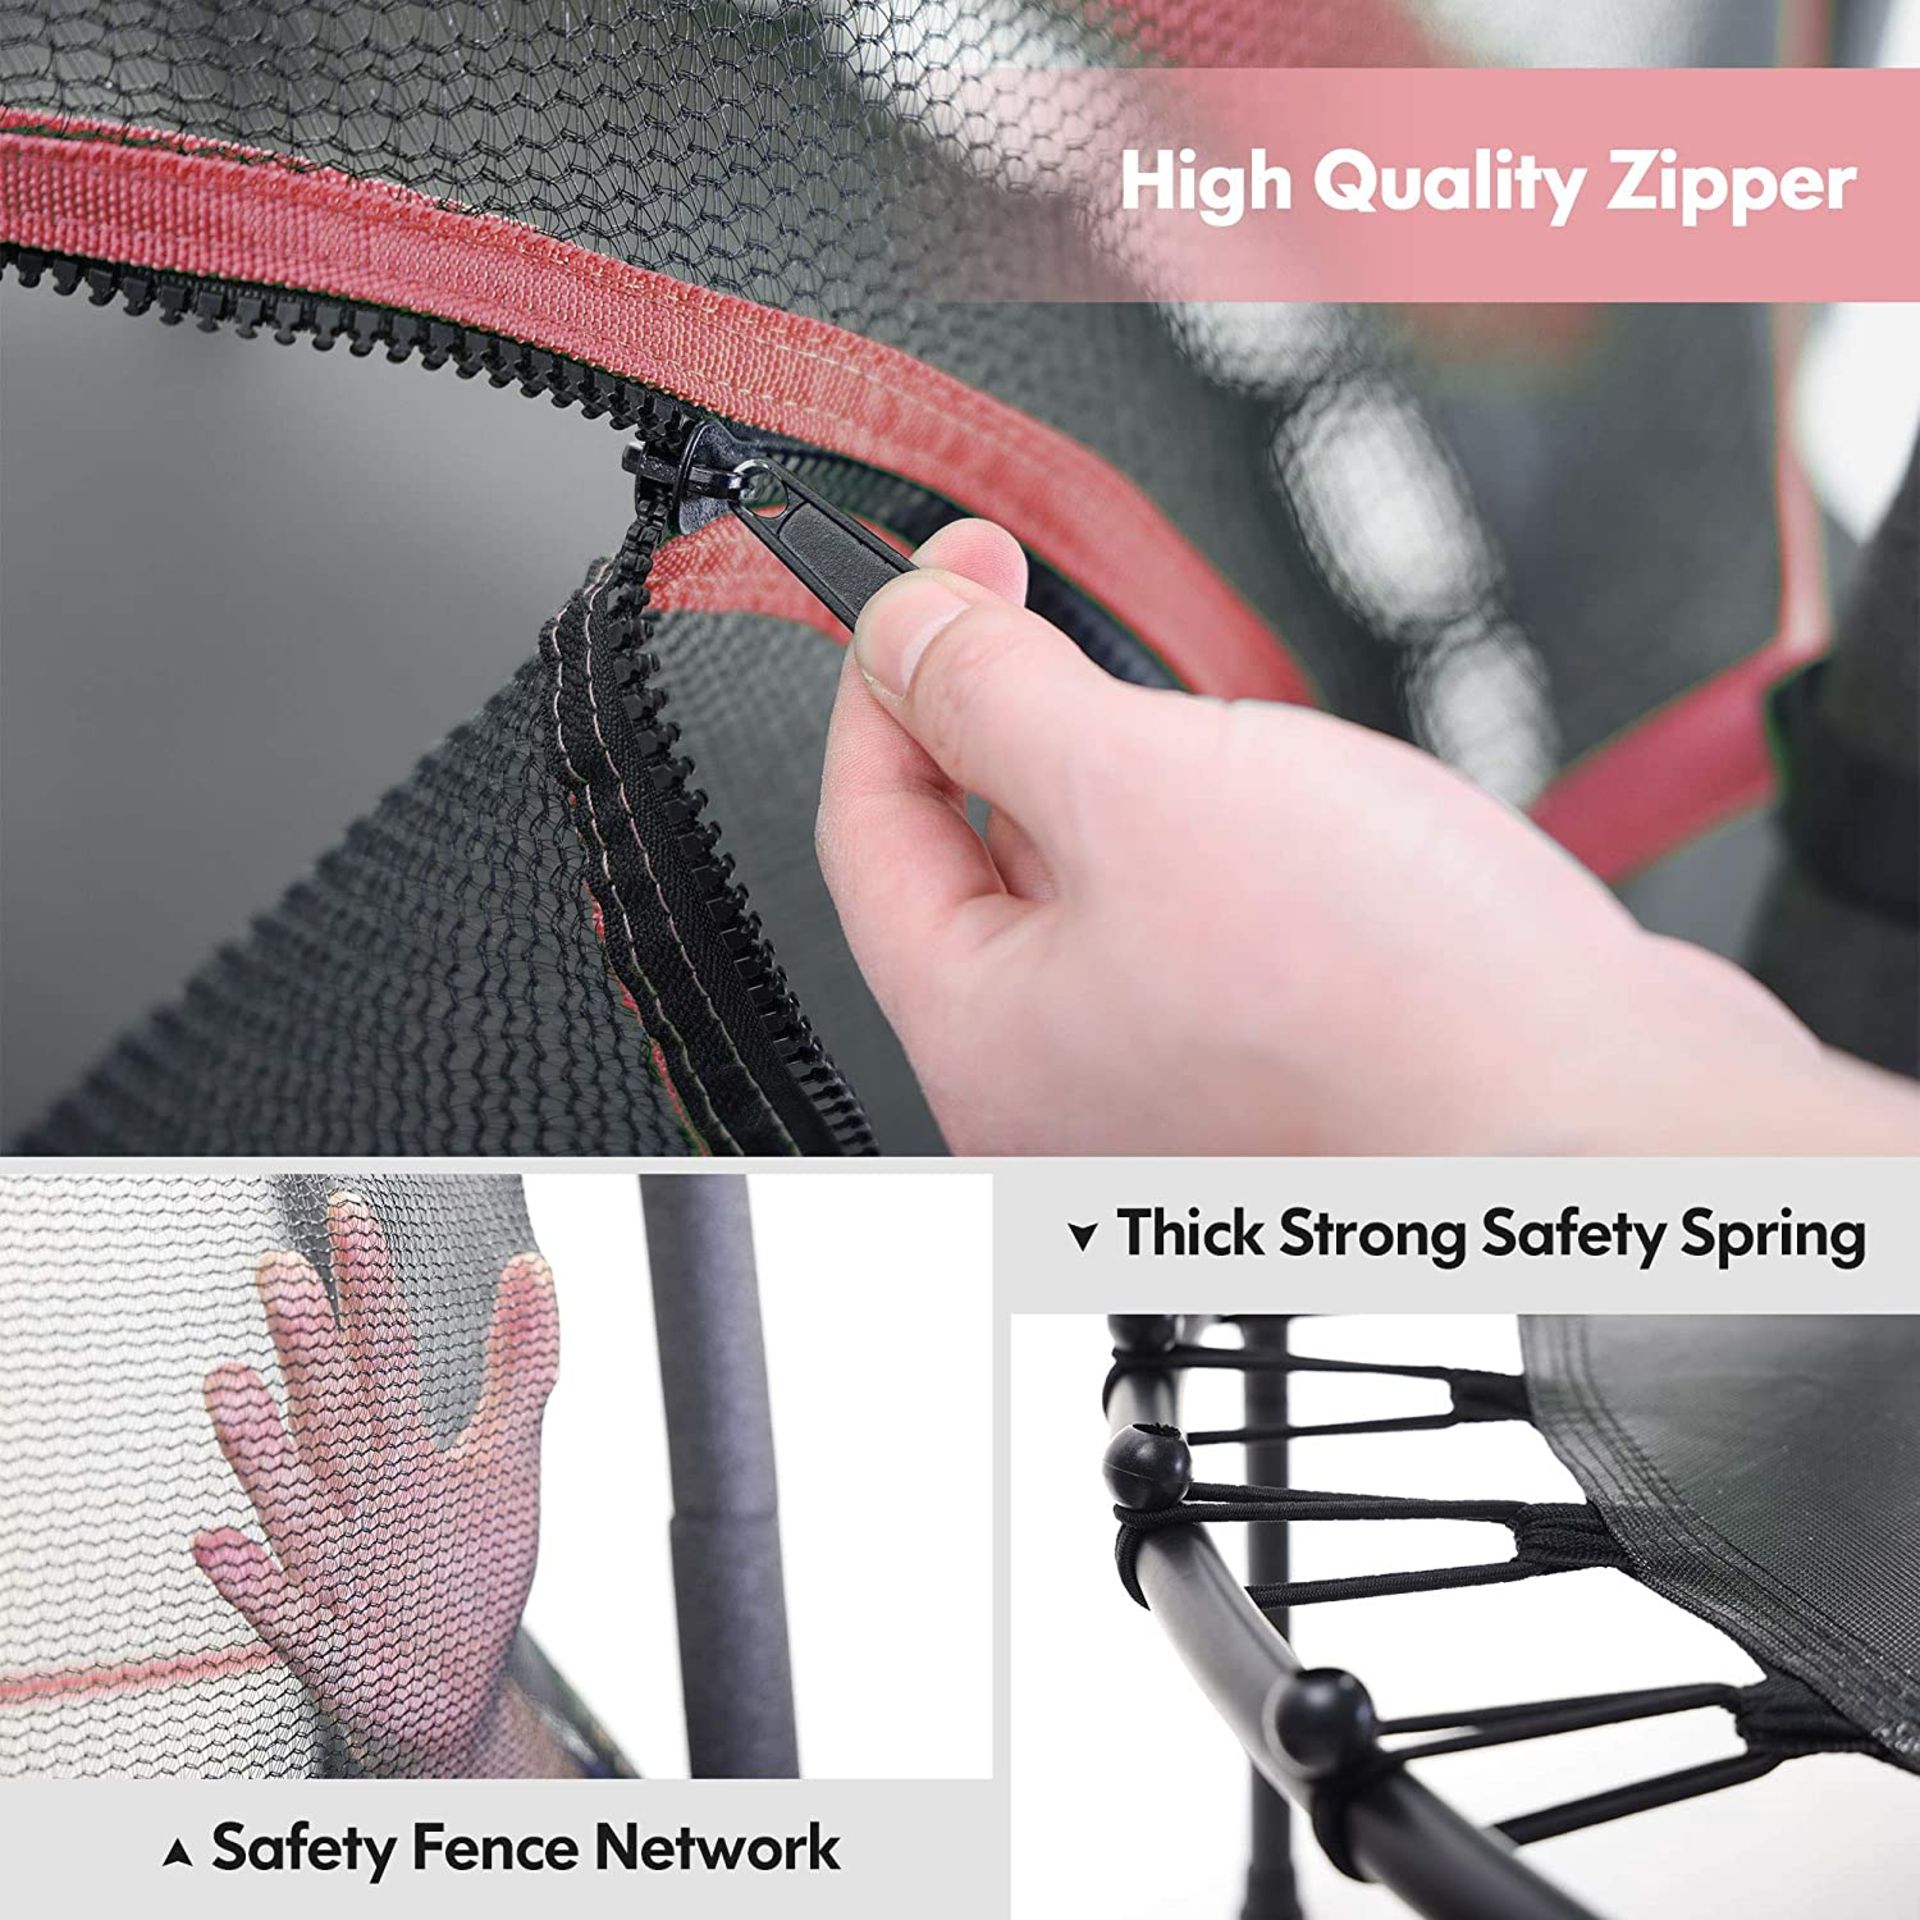 Brand new 54” Trampoline for Kids, Mini Toddler Trampoline with Safety Enclosure, Indoor & Outdoor - Image 2 of 3